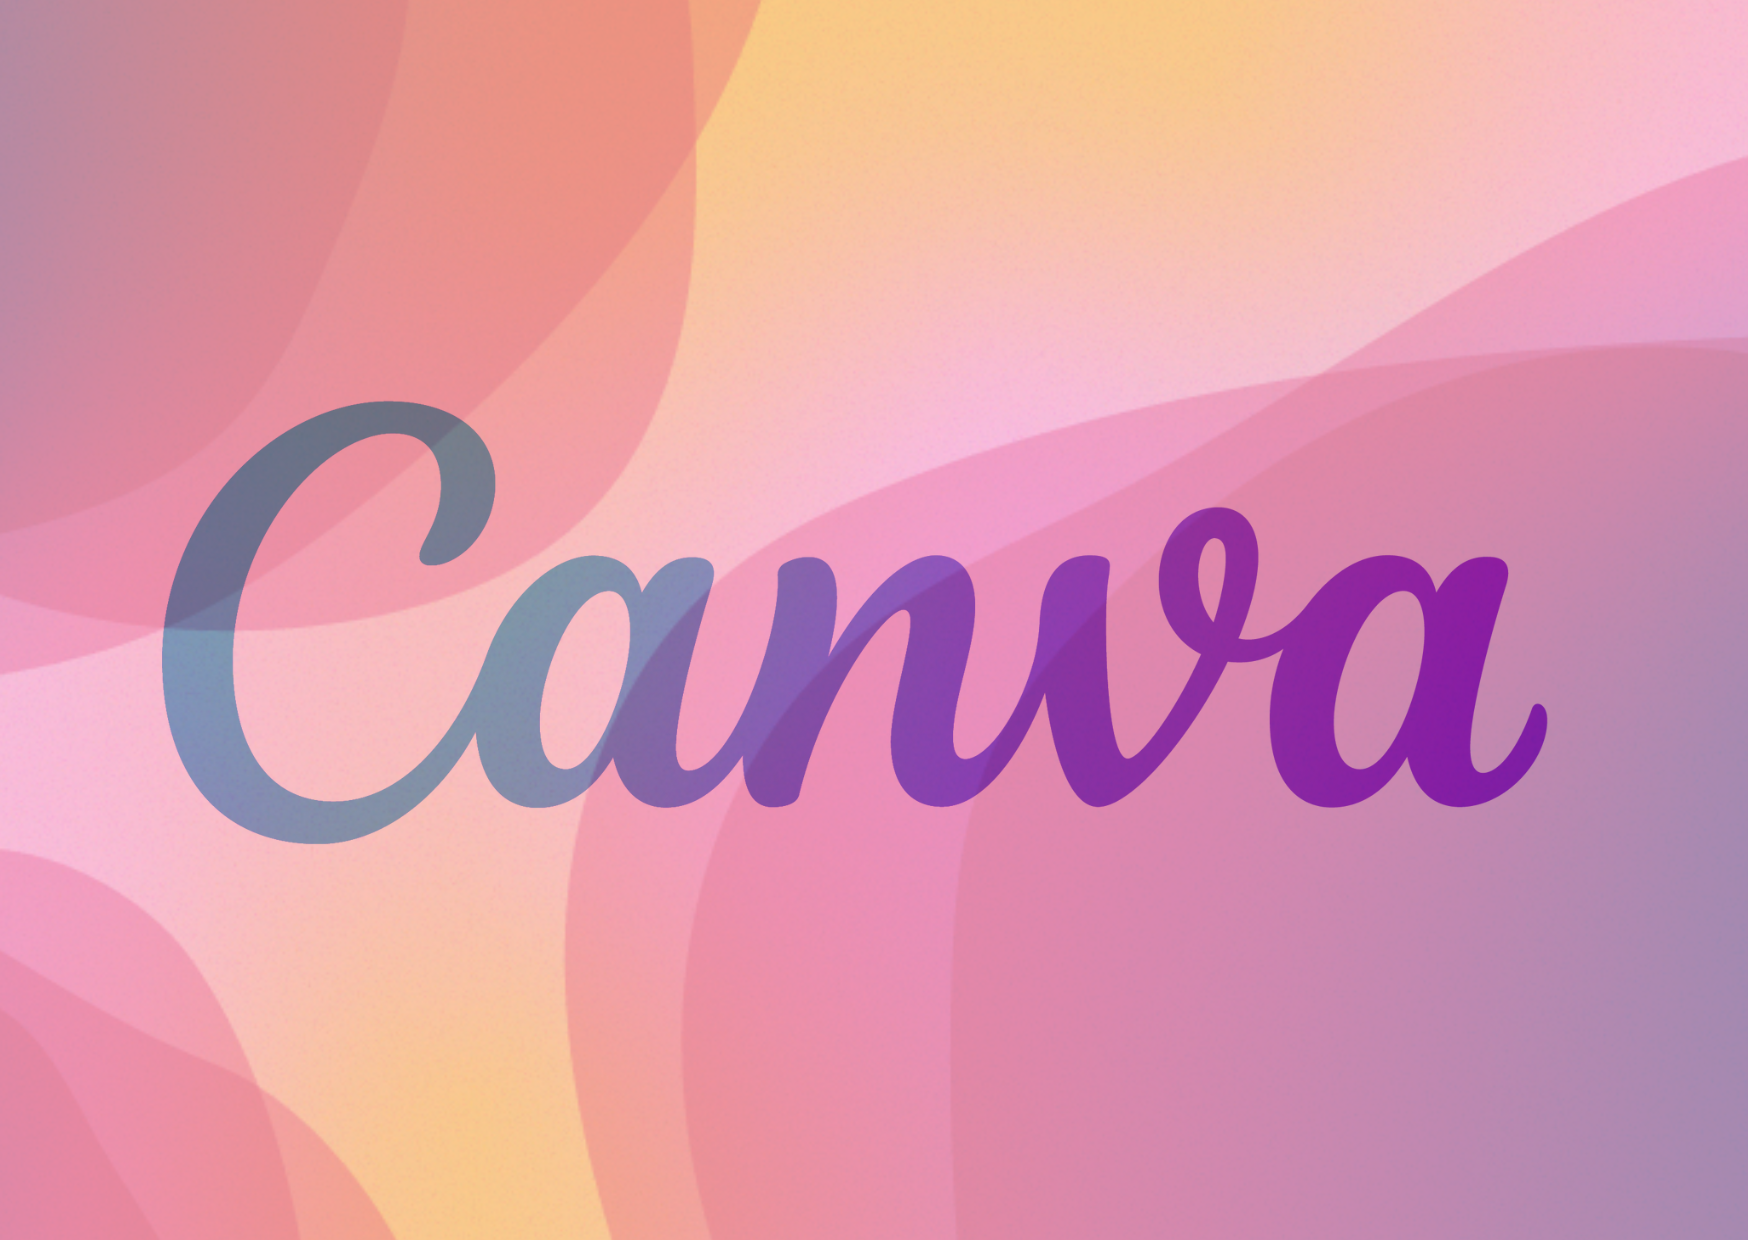 Improving Graphics For Nonprofits Using Canva AI Features - ProMo